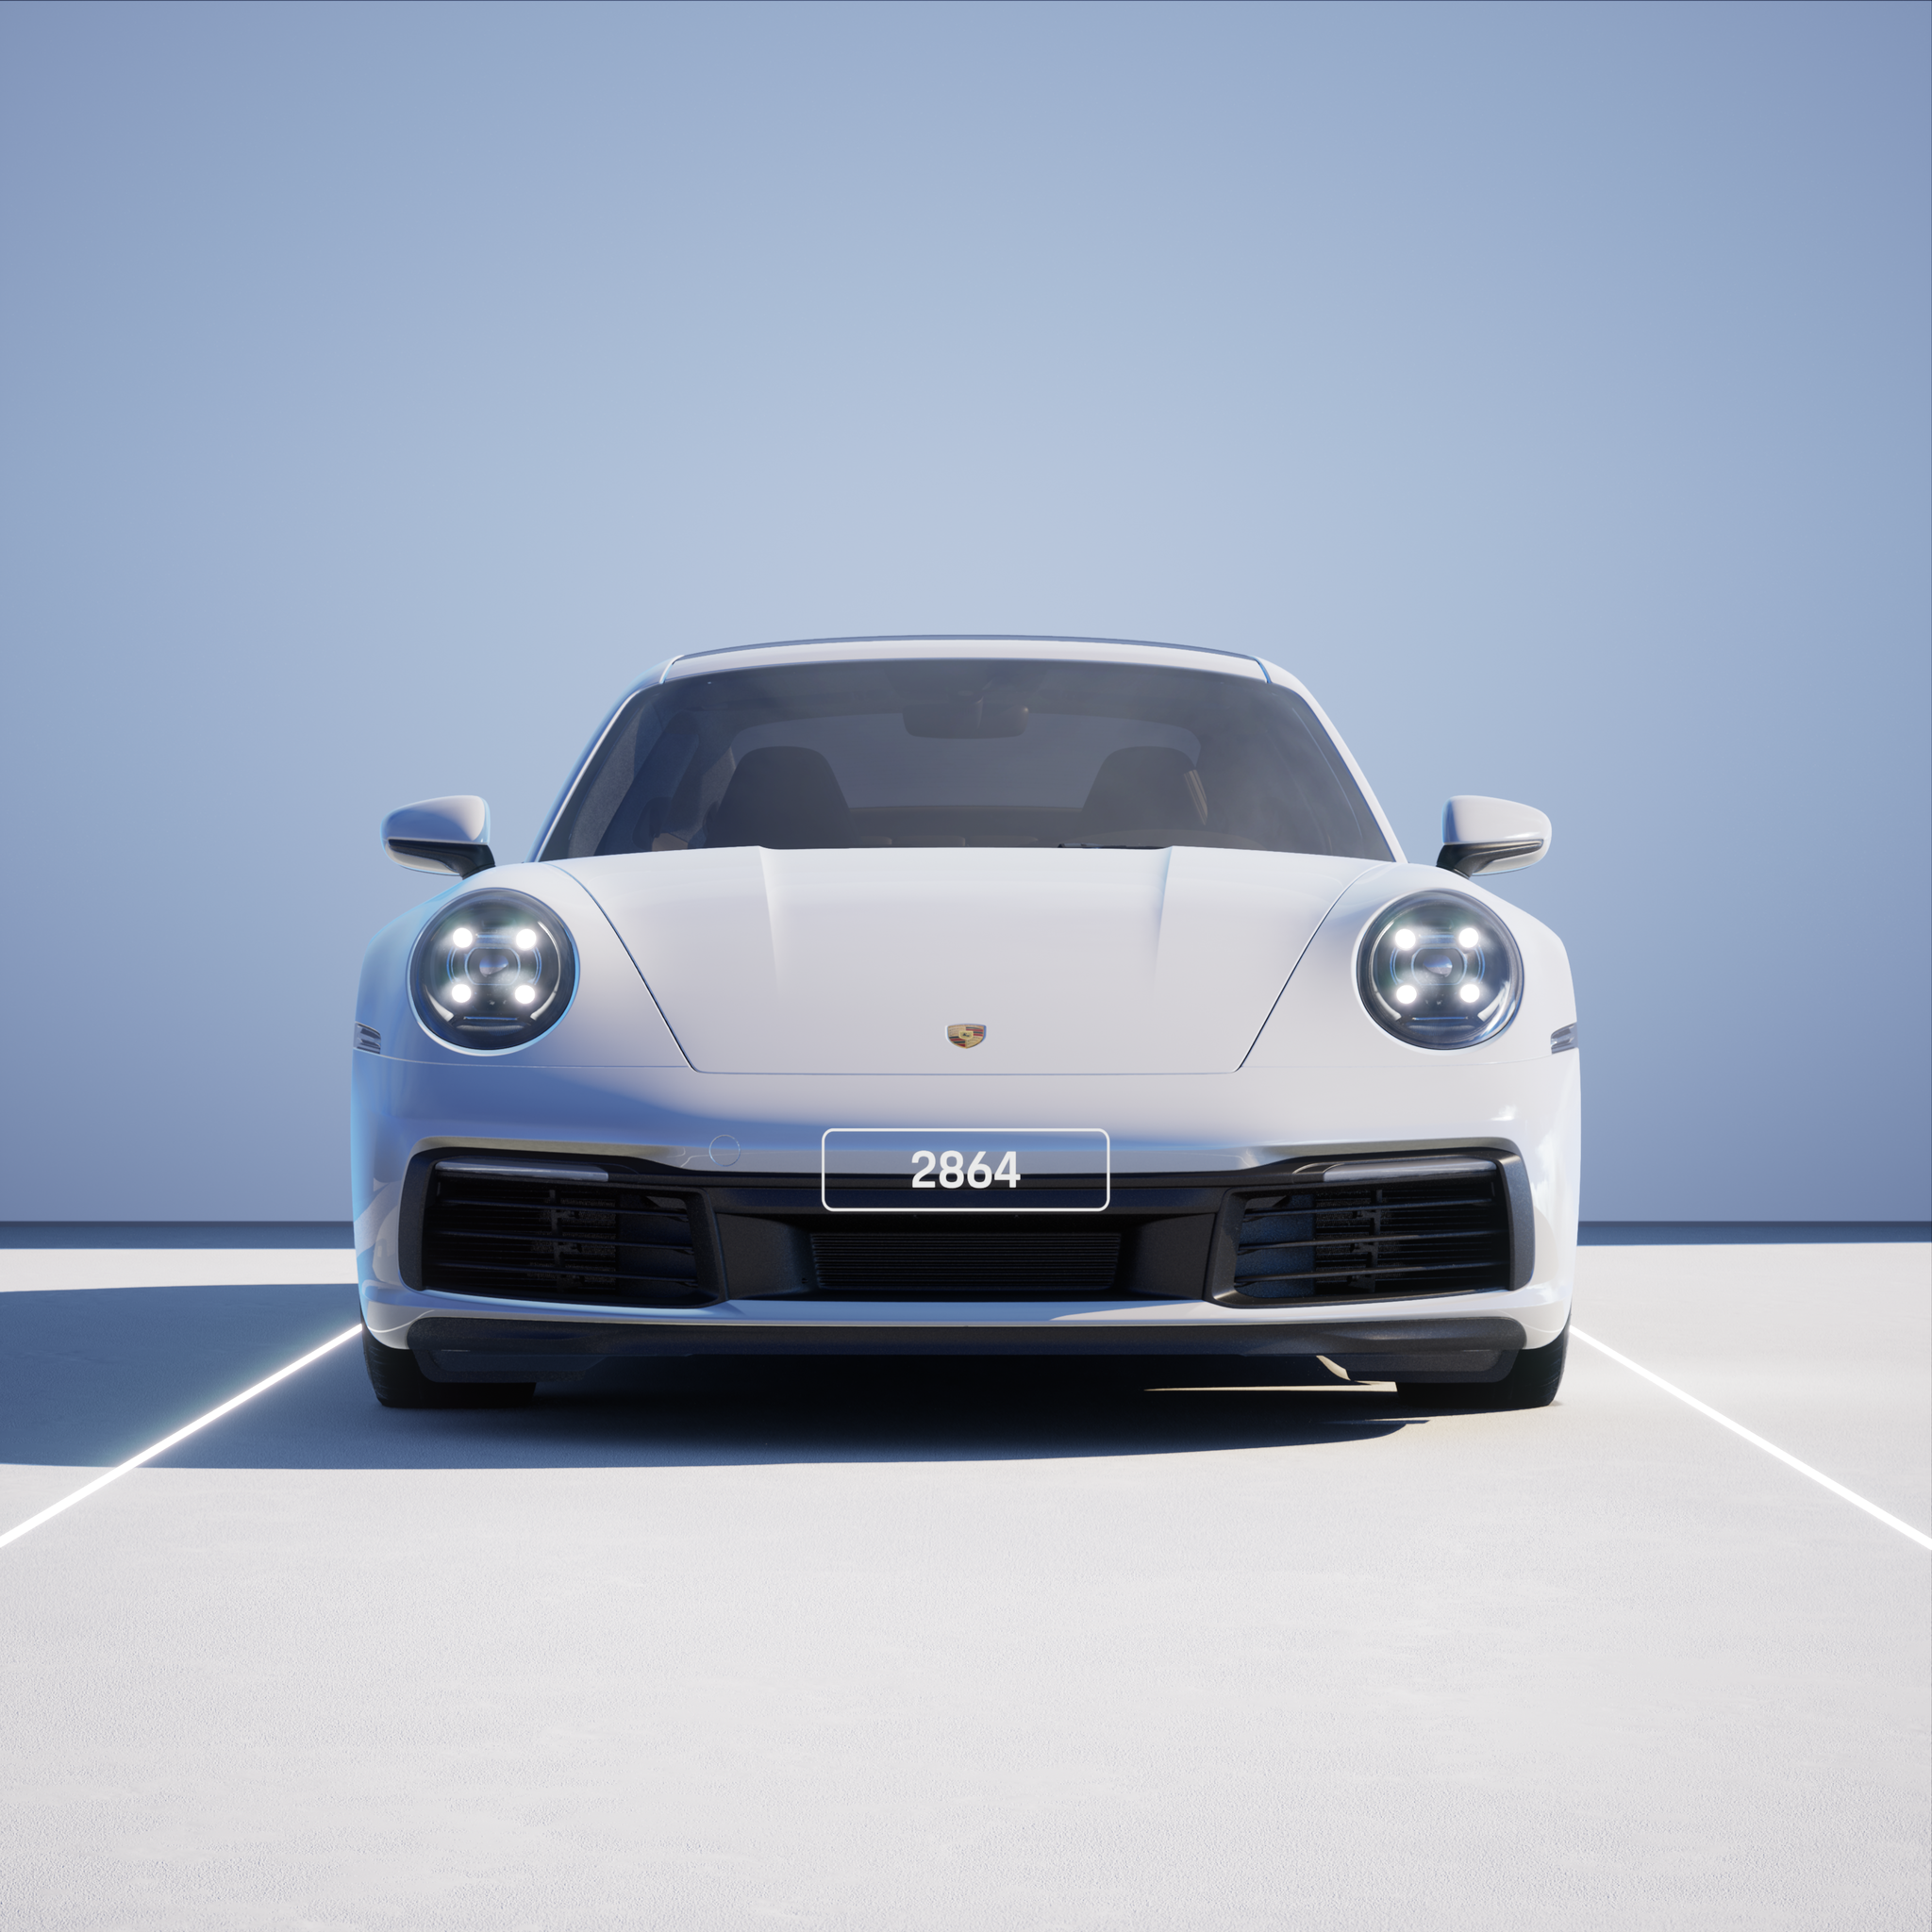 The PORSCHΞ 911 2864 image in phase